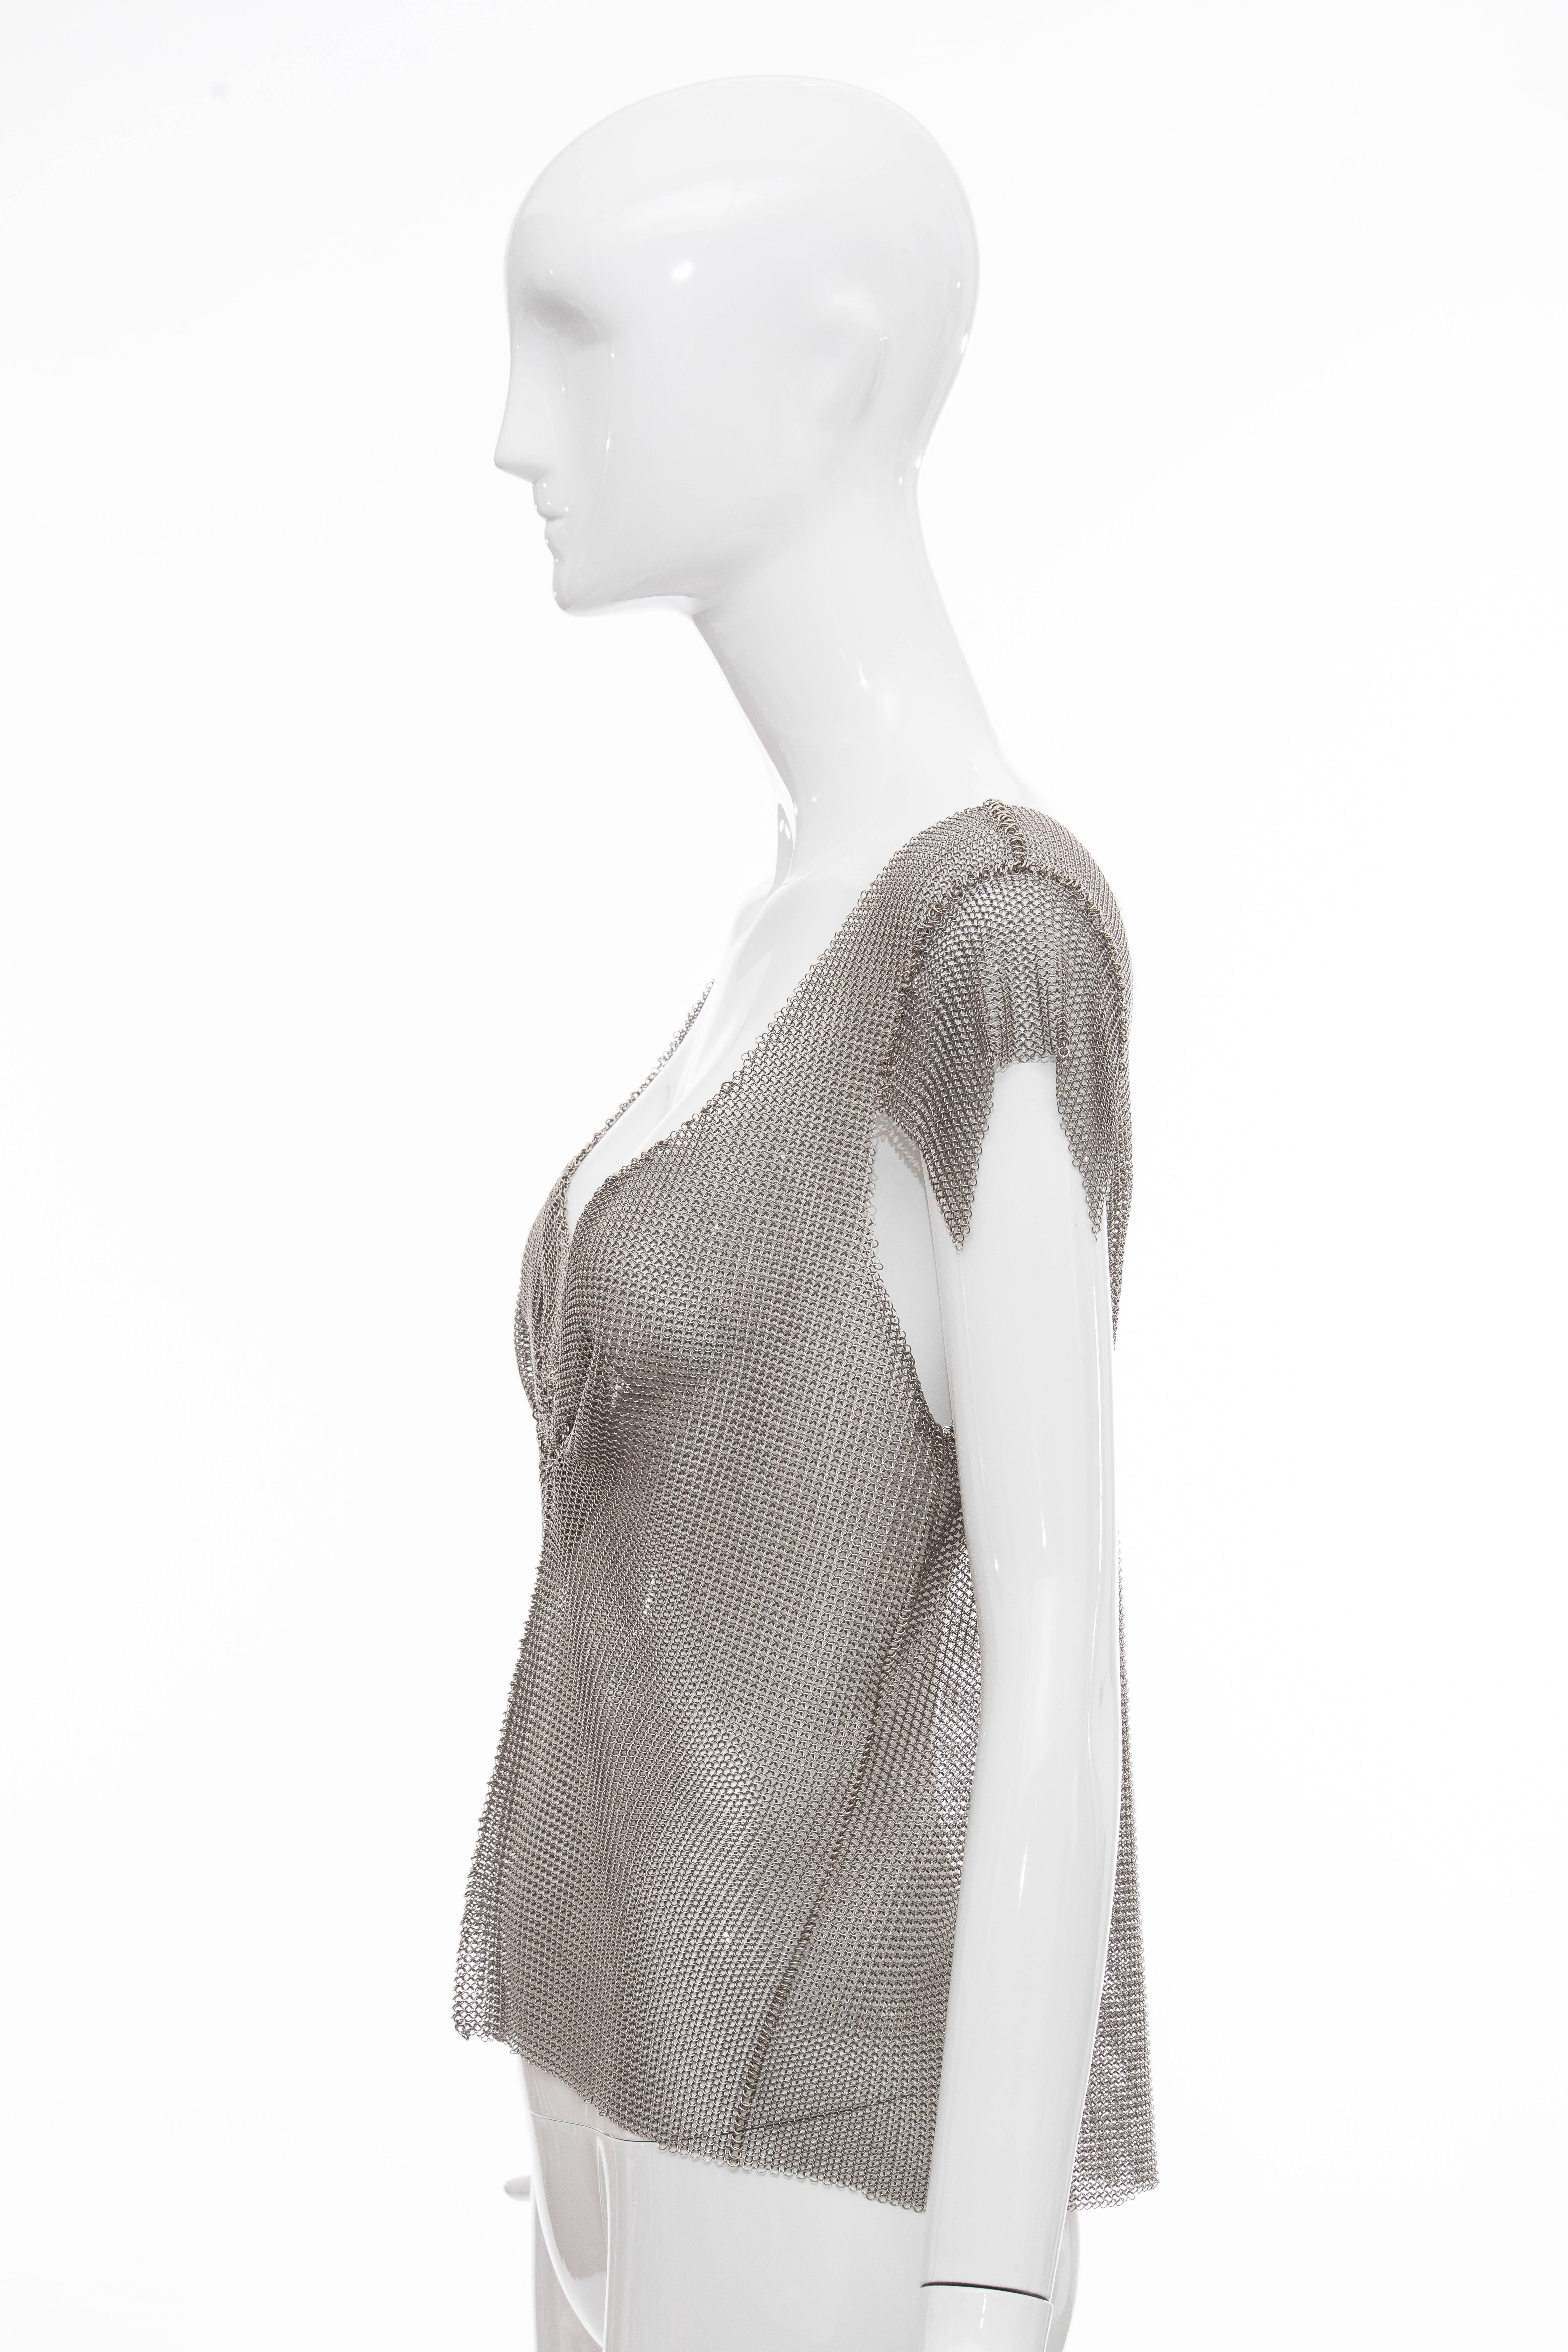 Women's Prada Silver Chain Mail Top With Cap Sleeve, Fall 2002